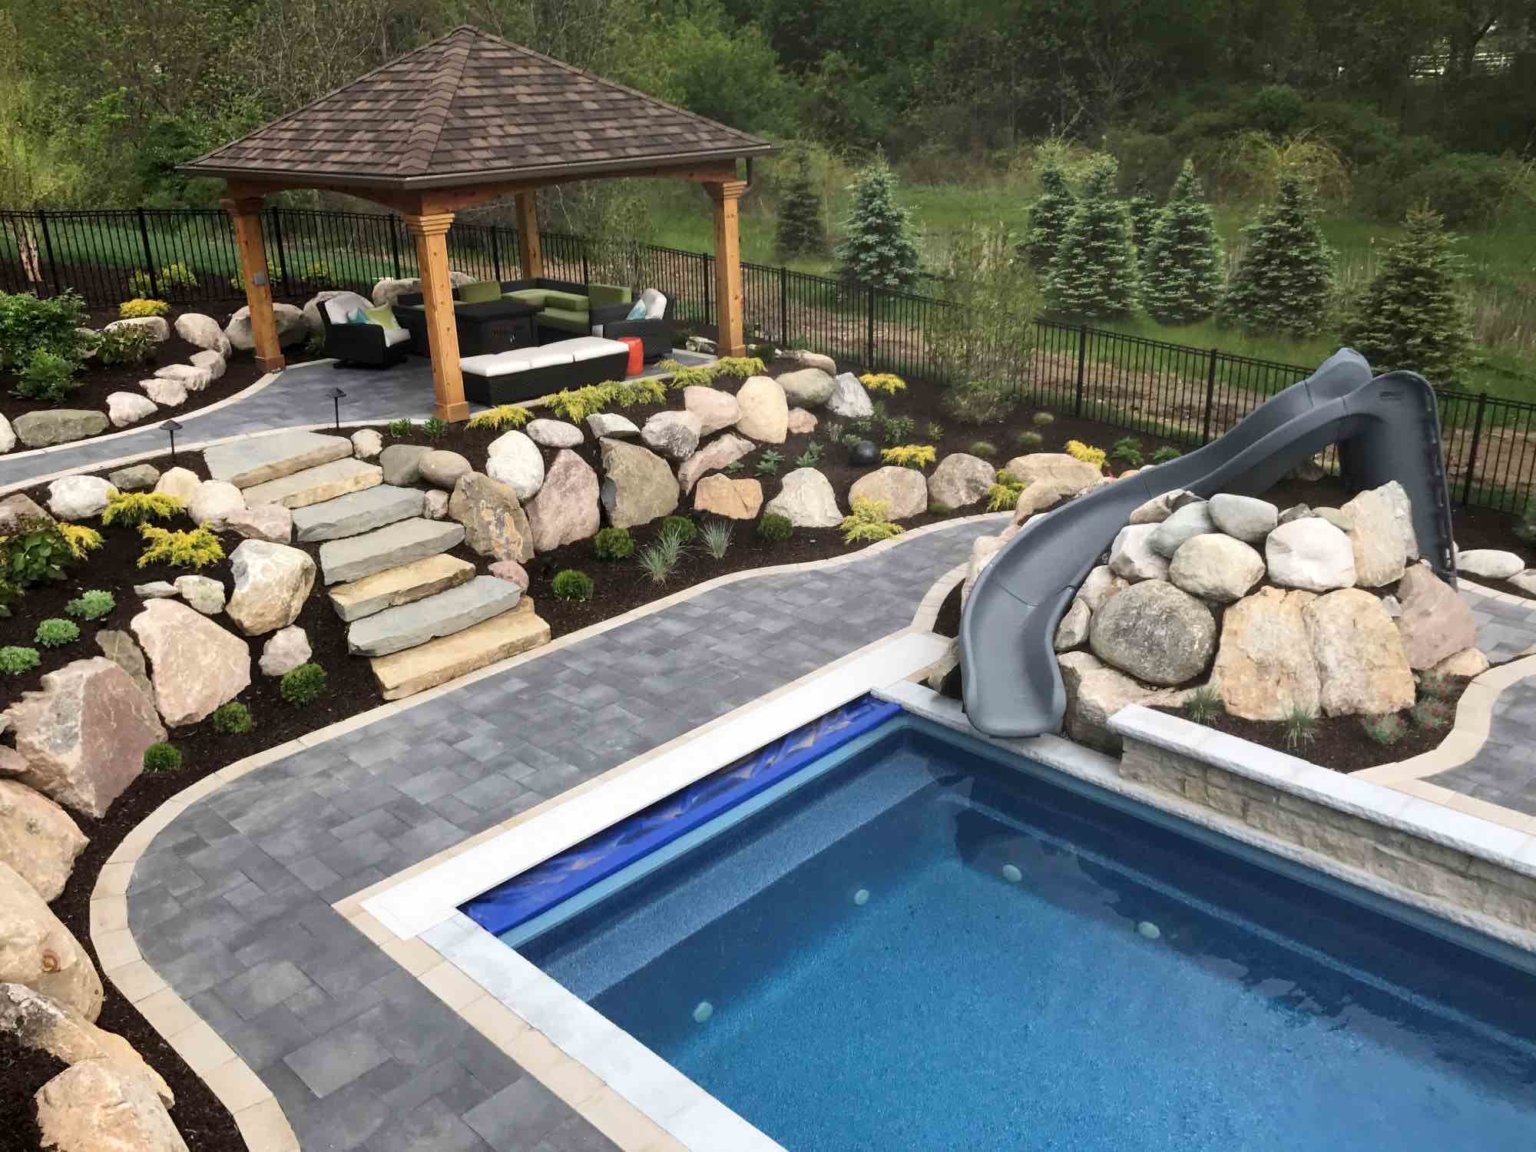 luxurious inground pool contractor in Northville, MI Rectangle fiberglass pool custom pools and spas Outdoor living space Custom inground pools Backyard pool ideas detroit Outdoor living contractor oak Outdoor living Northville mi pool and spa design Metro Detroit Metro Detroit pool and spa experts Custom pool design Metro Detroit Spa installation in Metro Detroit Metro Detroit outdoor spa design Residential pool design Metro Detroit